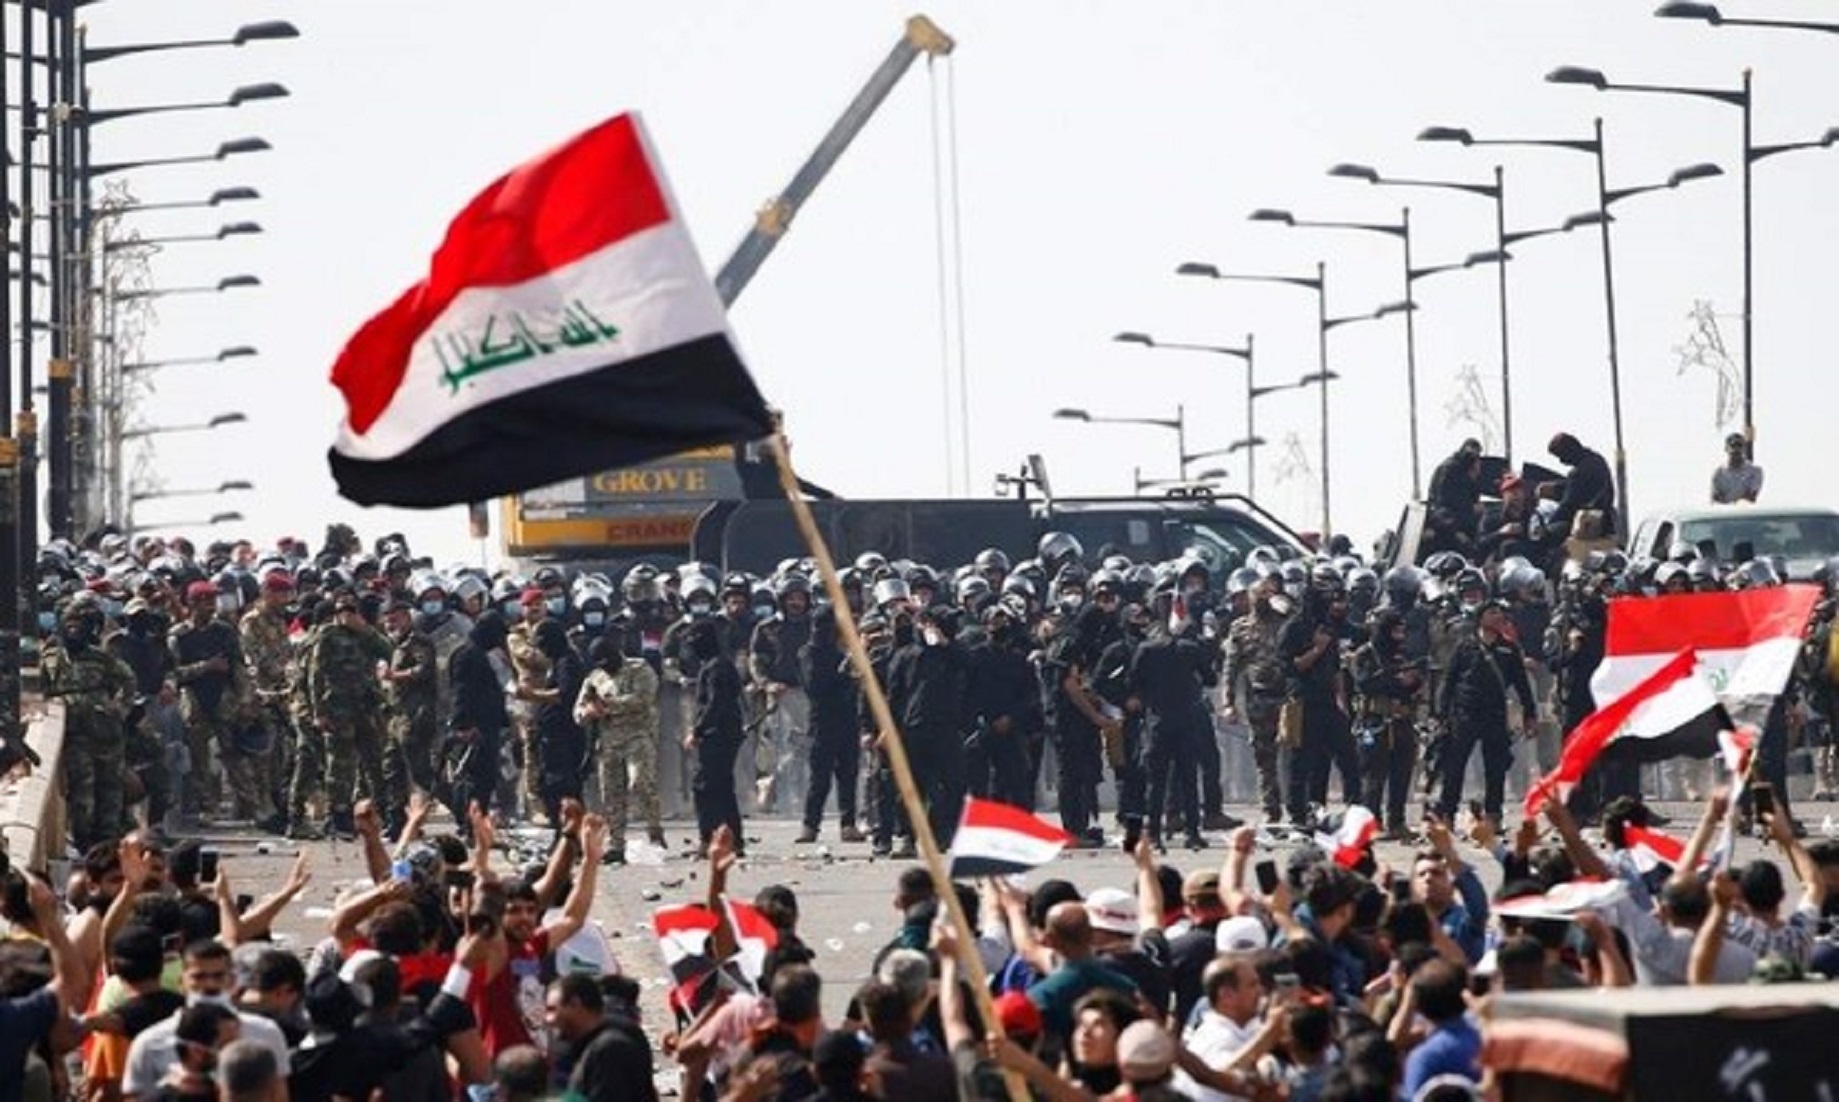 Four killed, scores wounded in Baghdad protests – police, medics